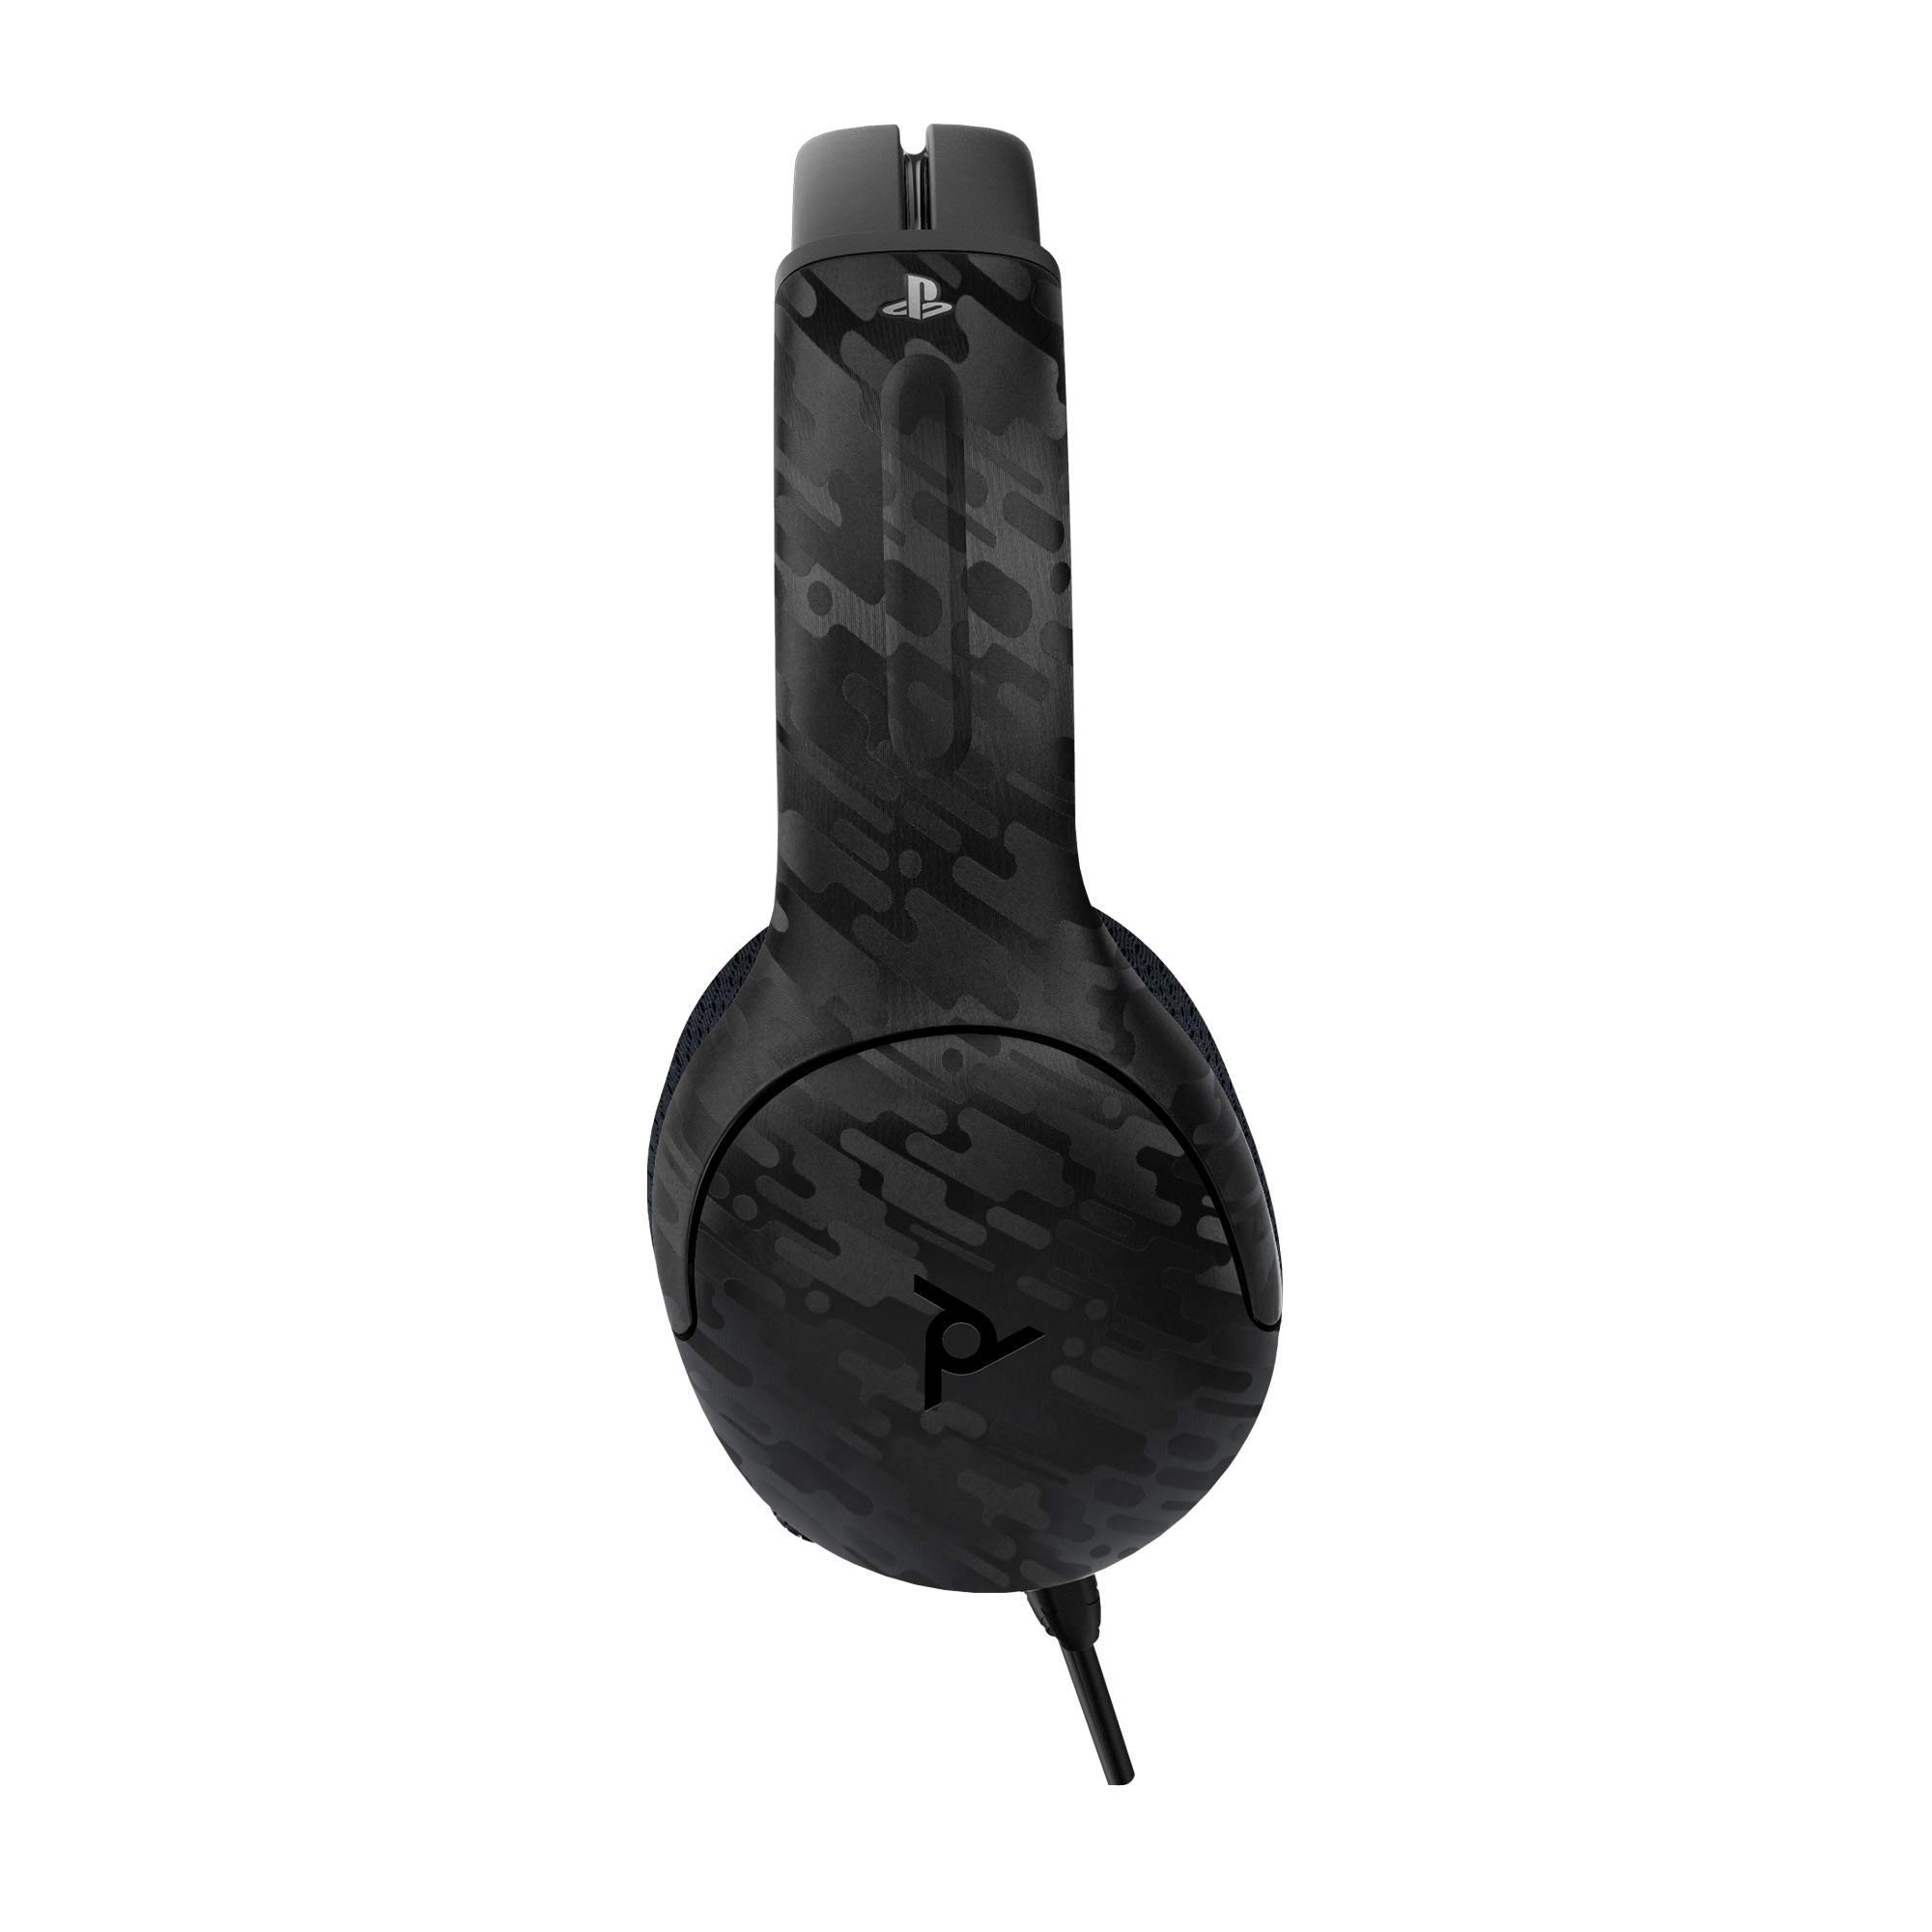 Playstation 5 Headset with Mic - Compatible with PS5, PS4, PC - Black Camo